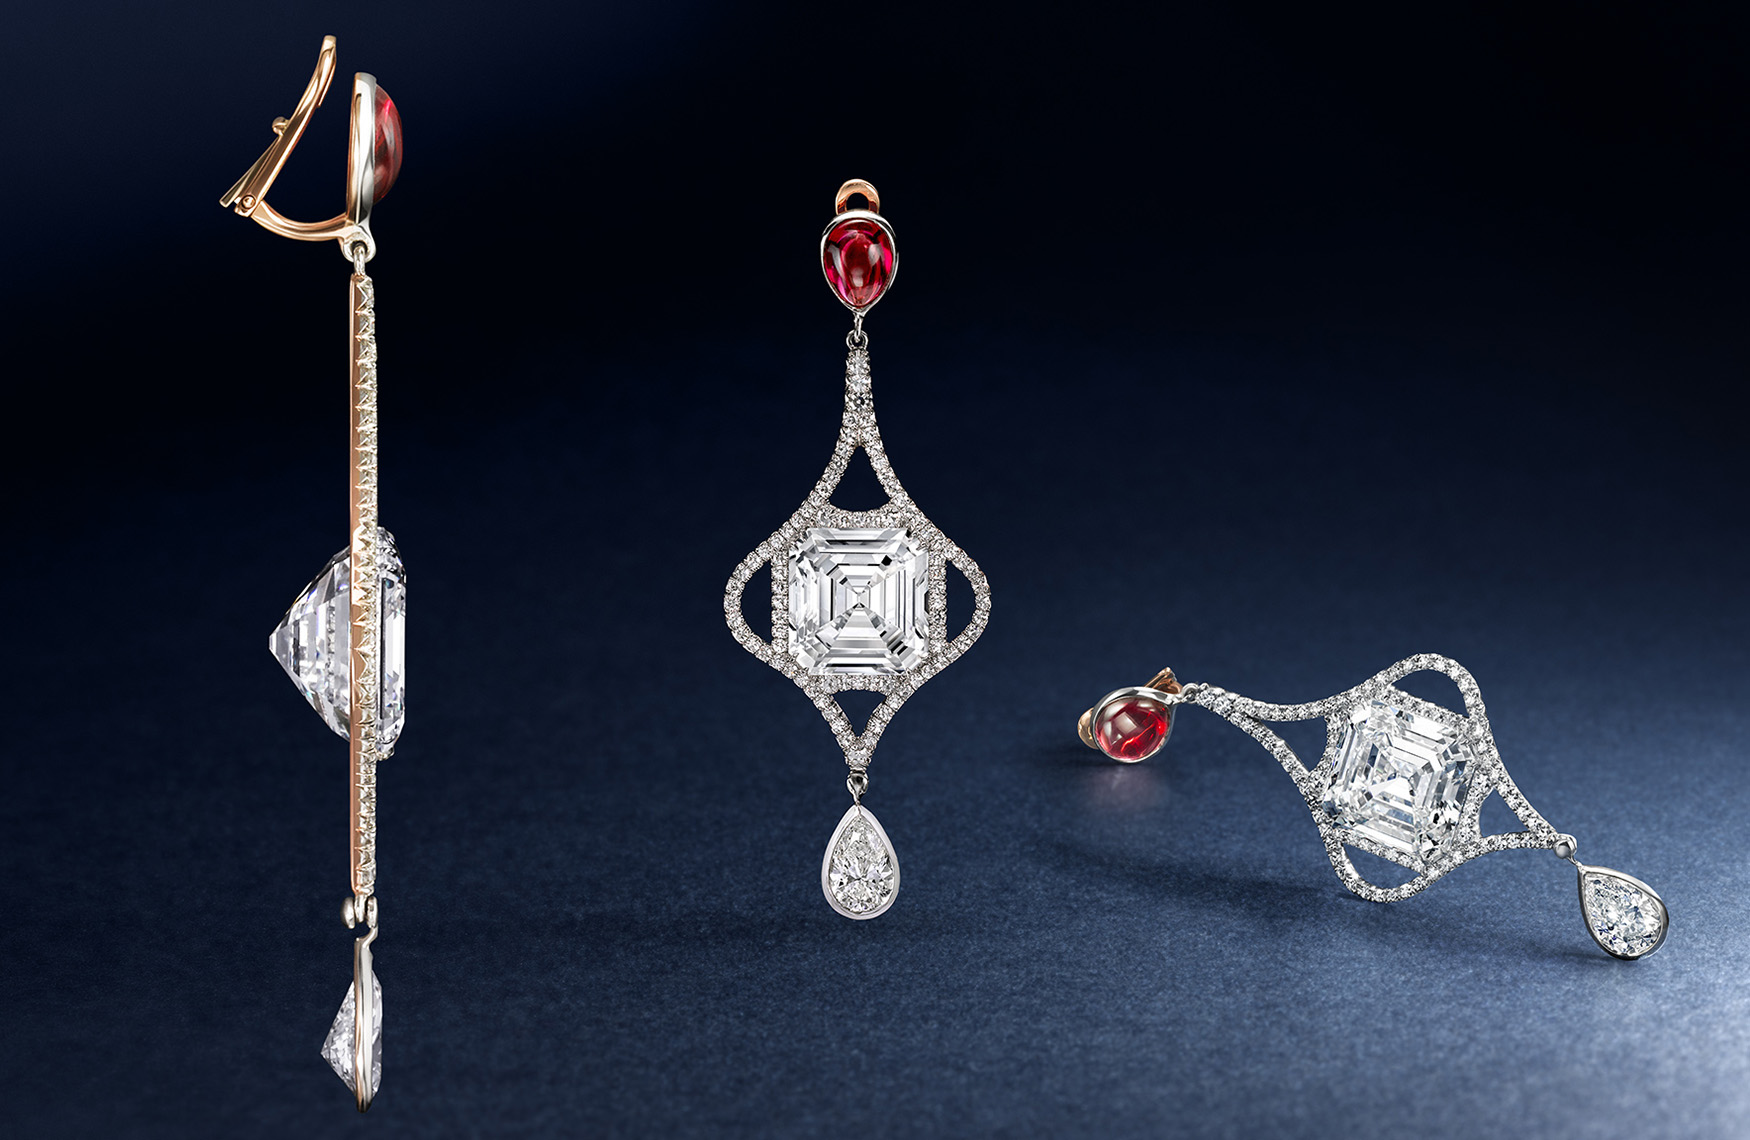 Jewelry Photography - James deGivenchy Diamond and Red Spinel Earrings